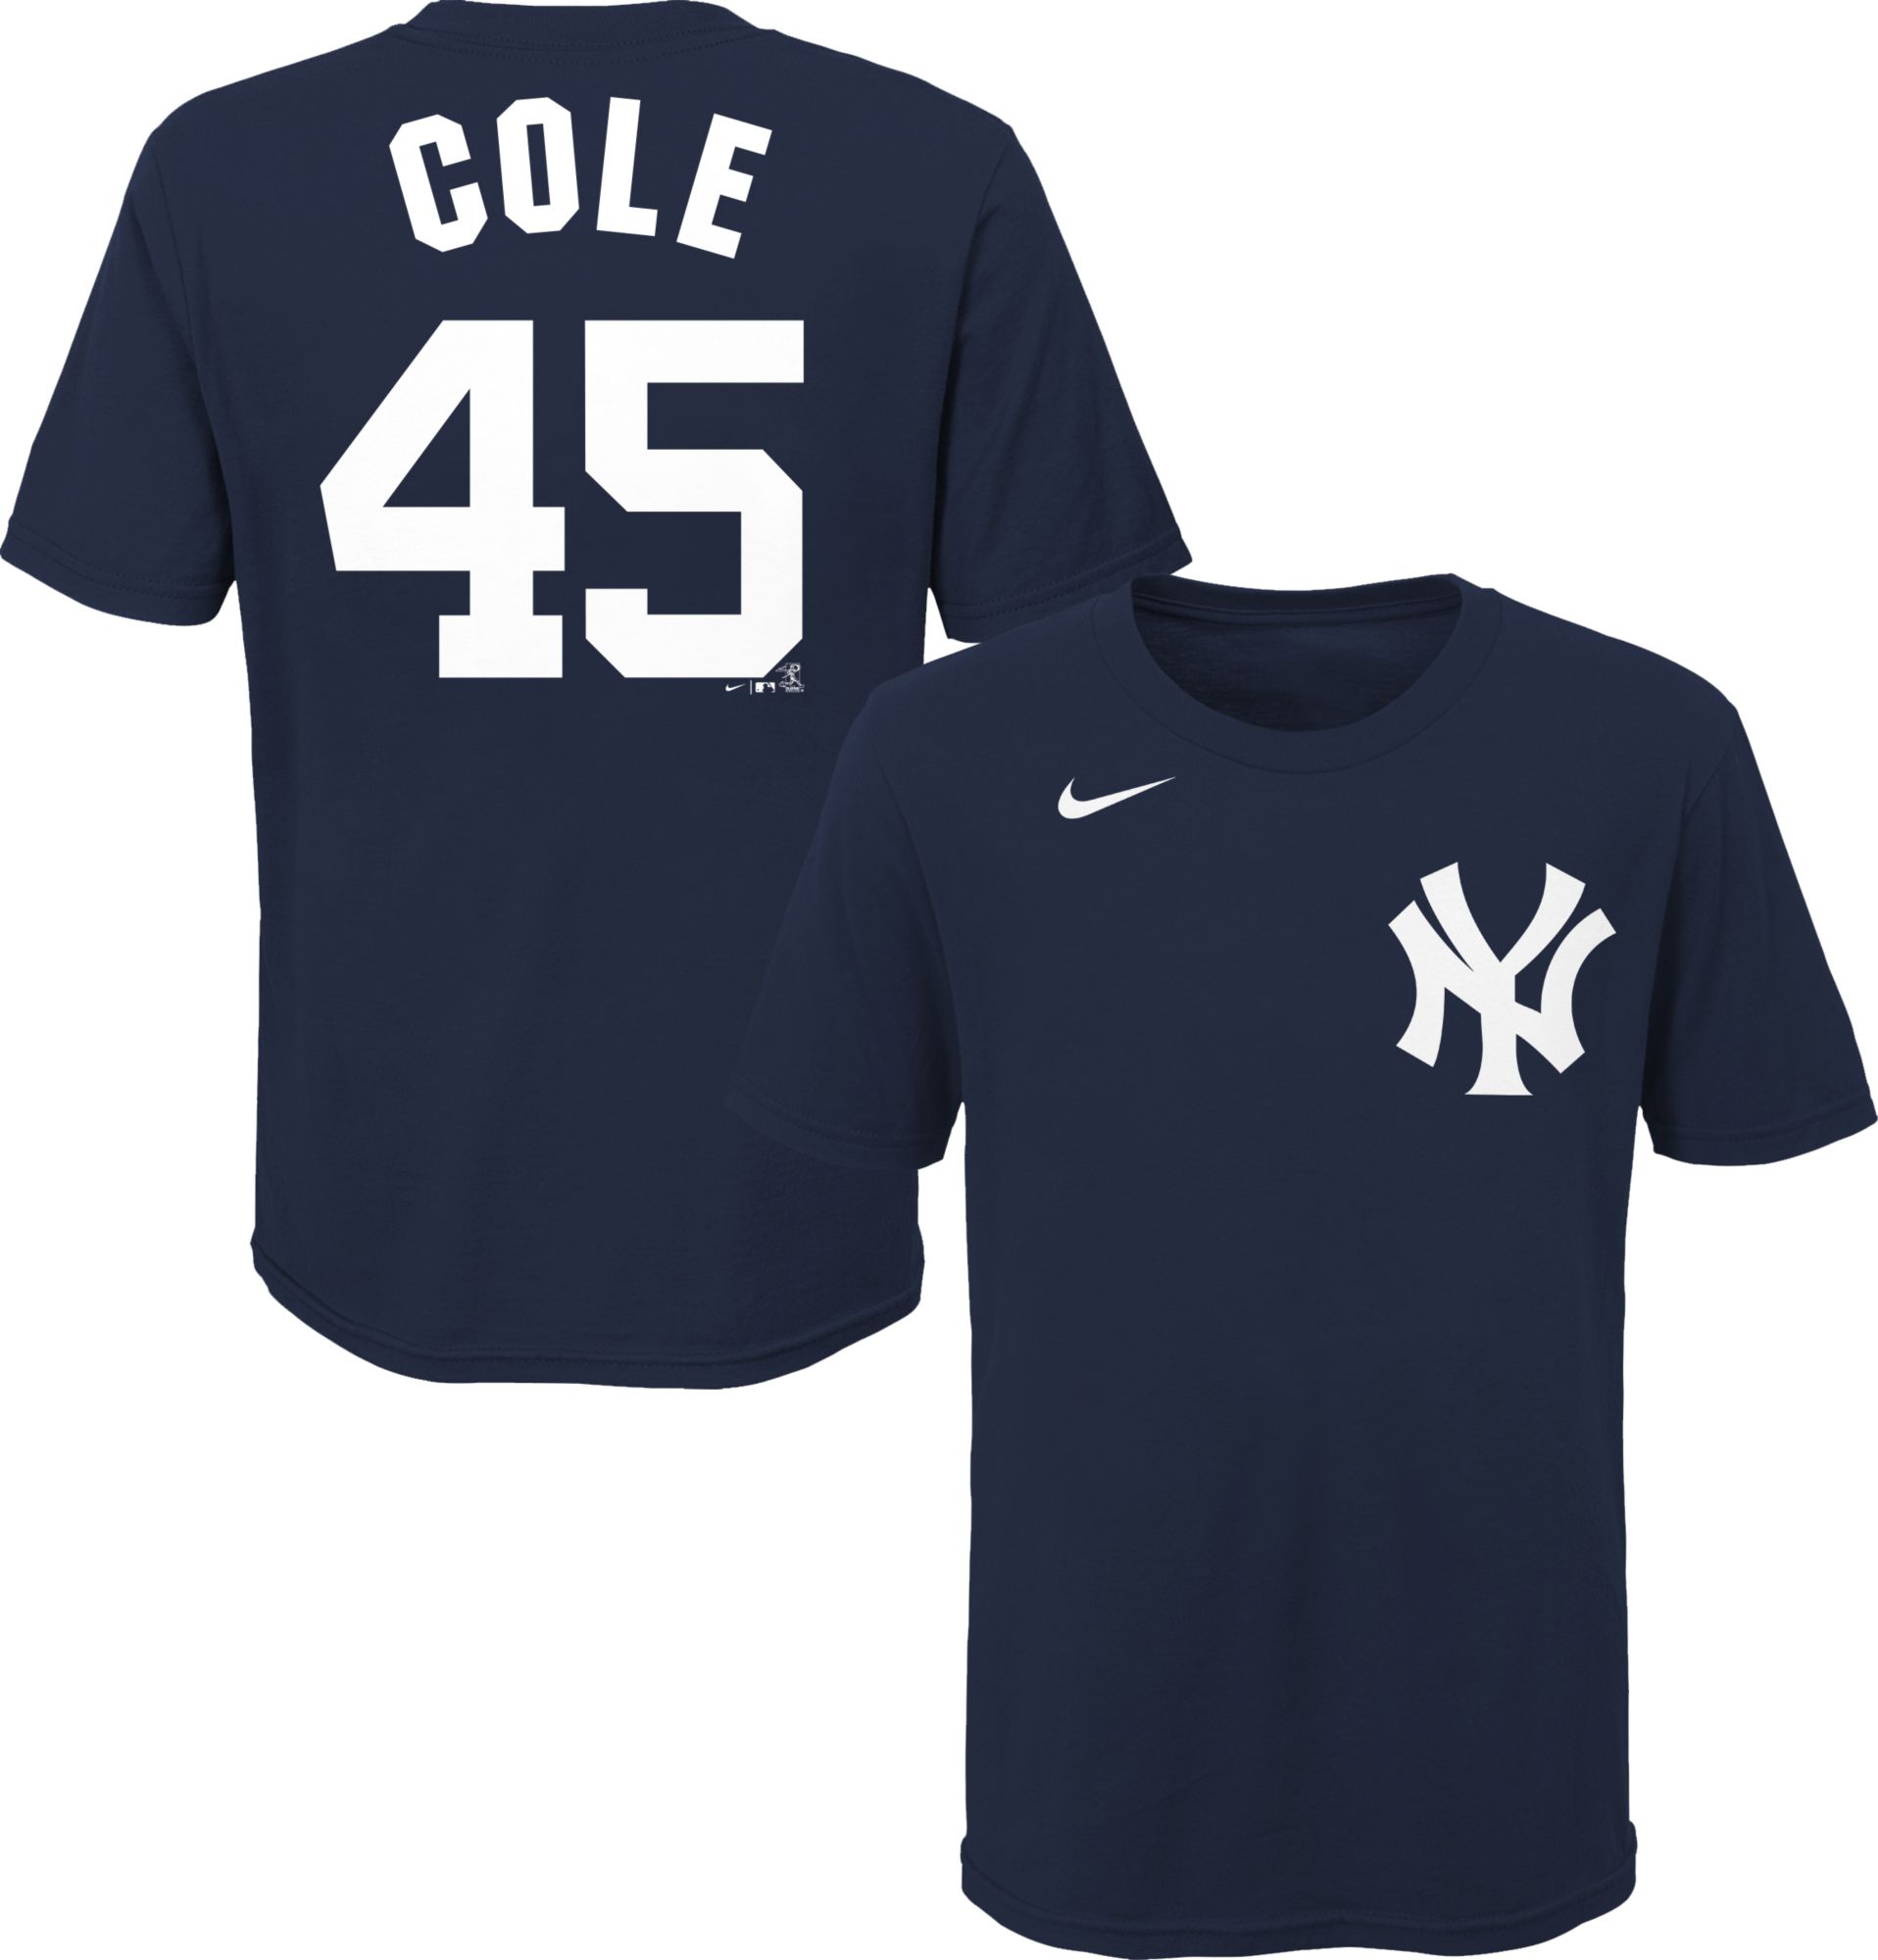 gerrit cole youth shirt